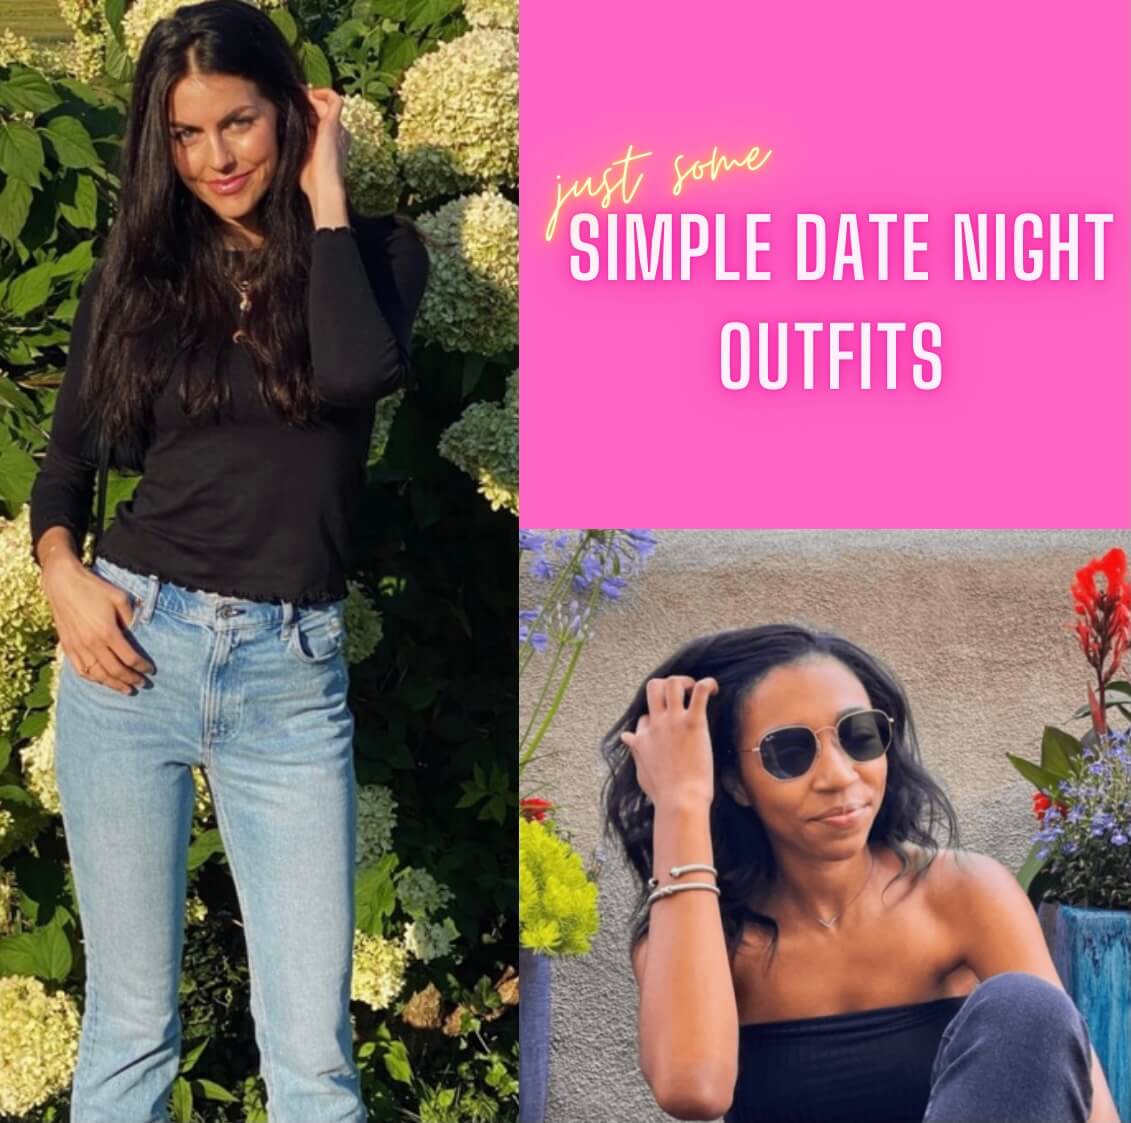 Image of Maddie and Sara in date night outfits with just some simple date night outfits written across